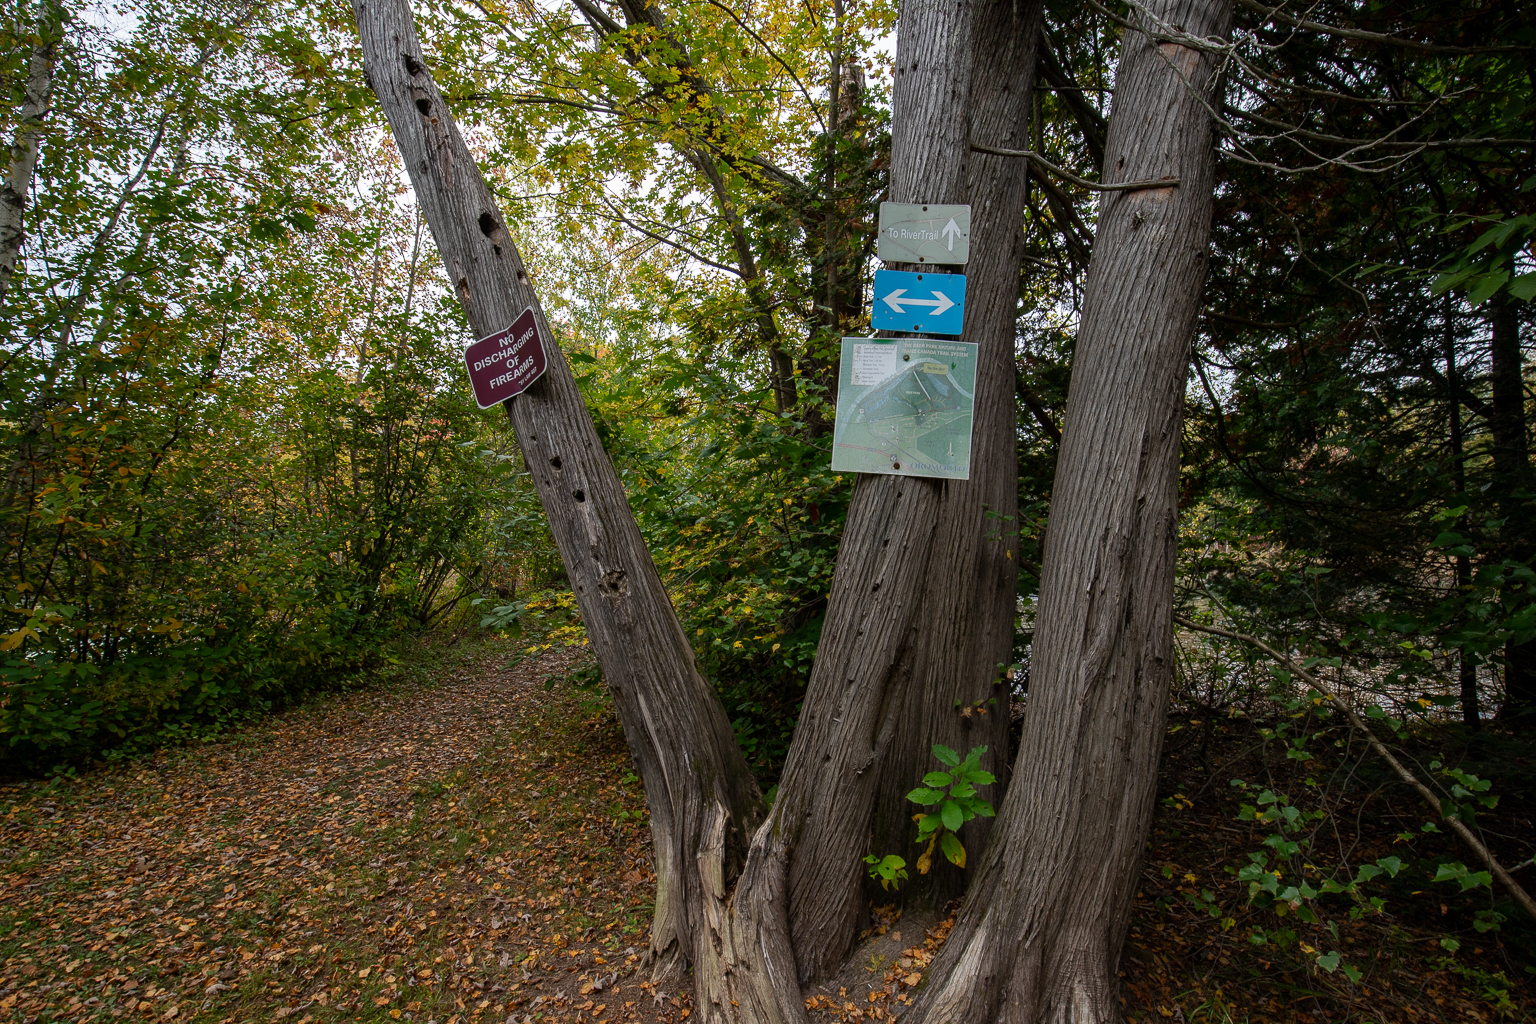 The signs at the trail junction with the River Trail